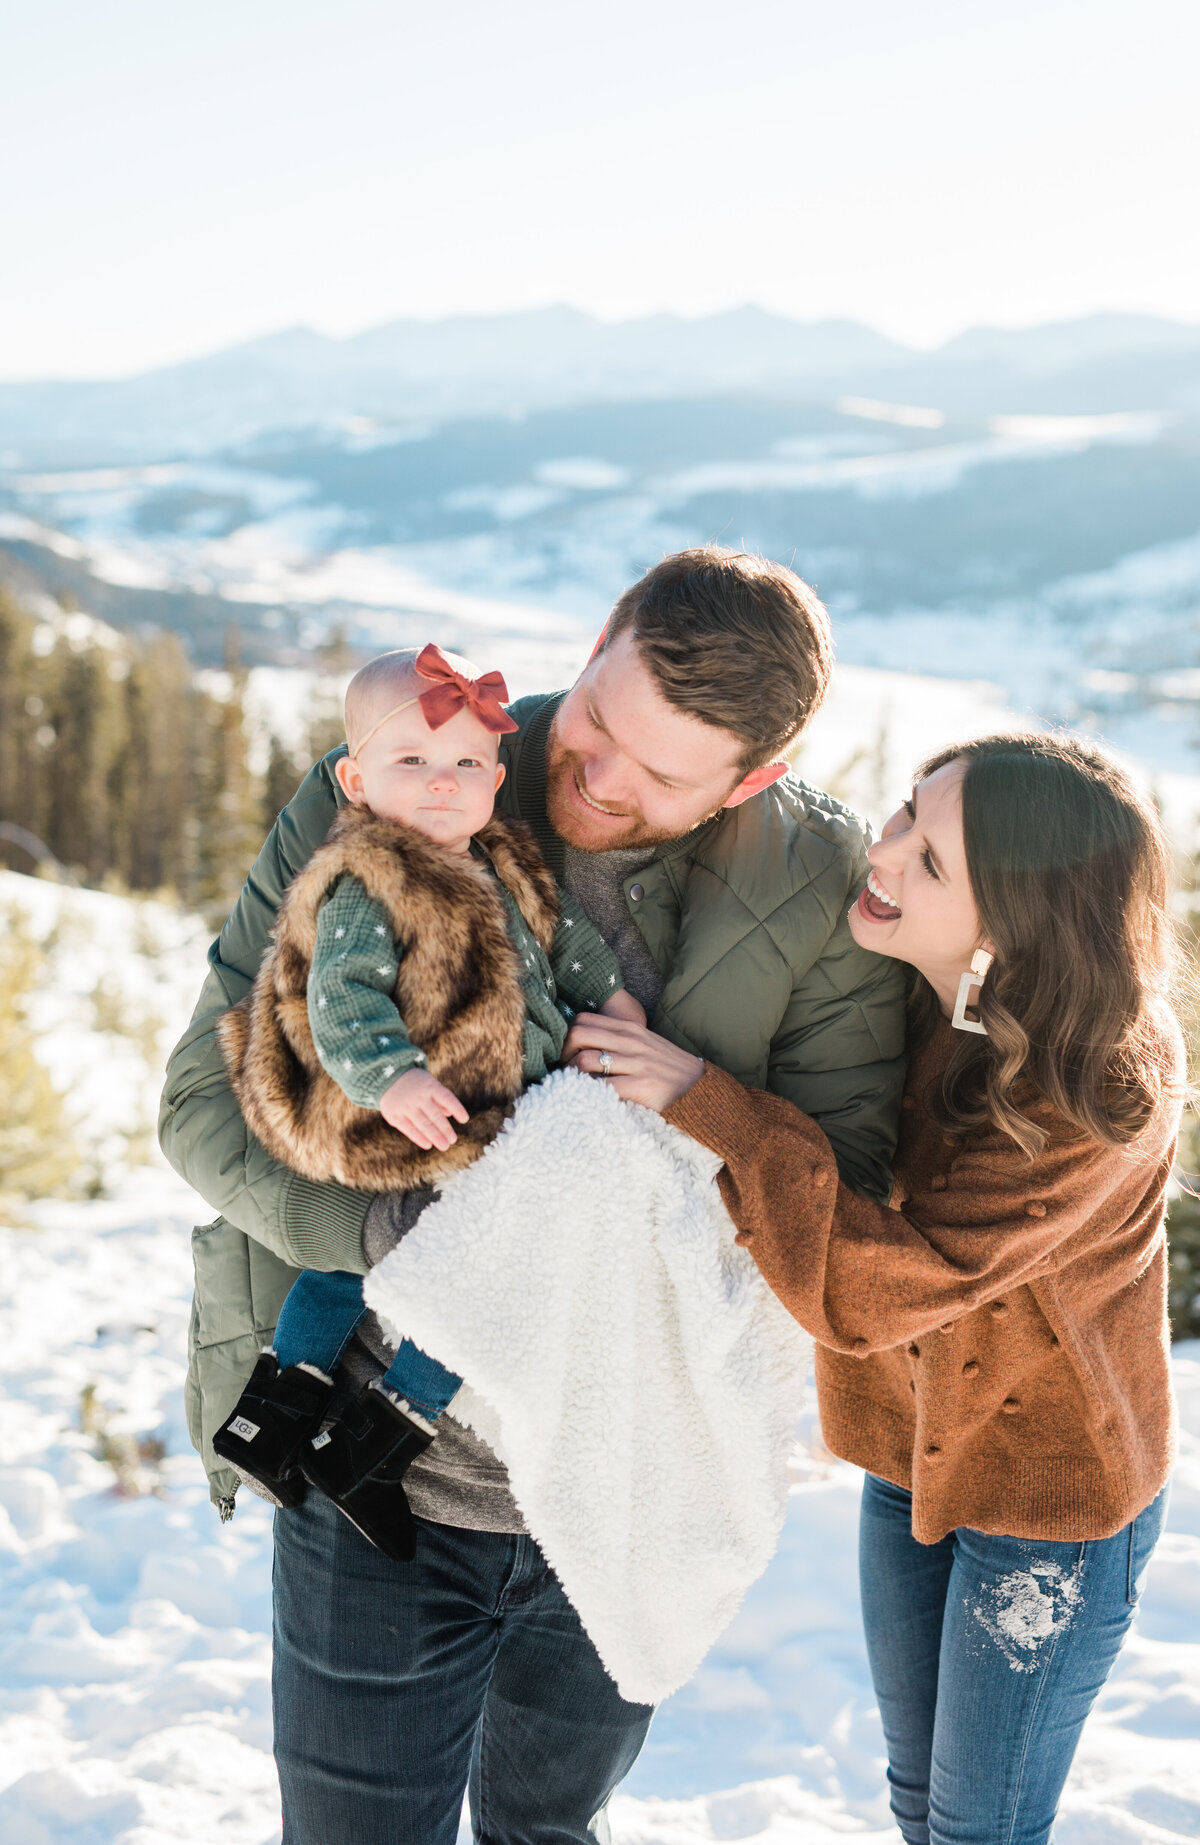 Parents of a young daughter have her bundled up on a winter day. They are posed for a photo